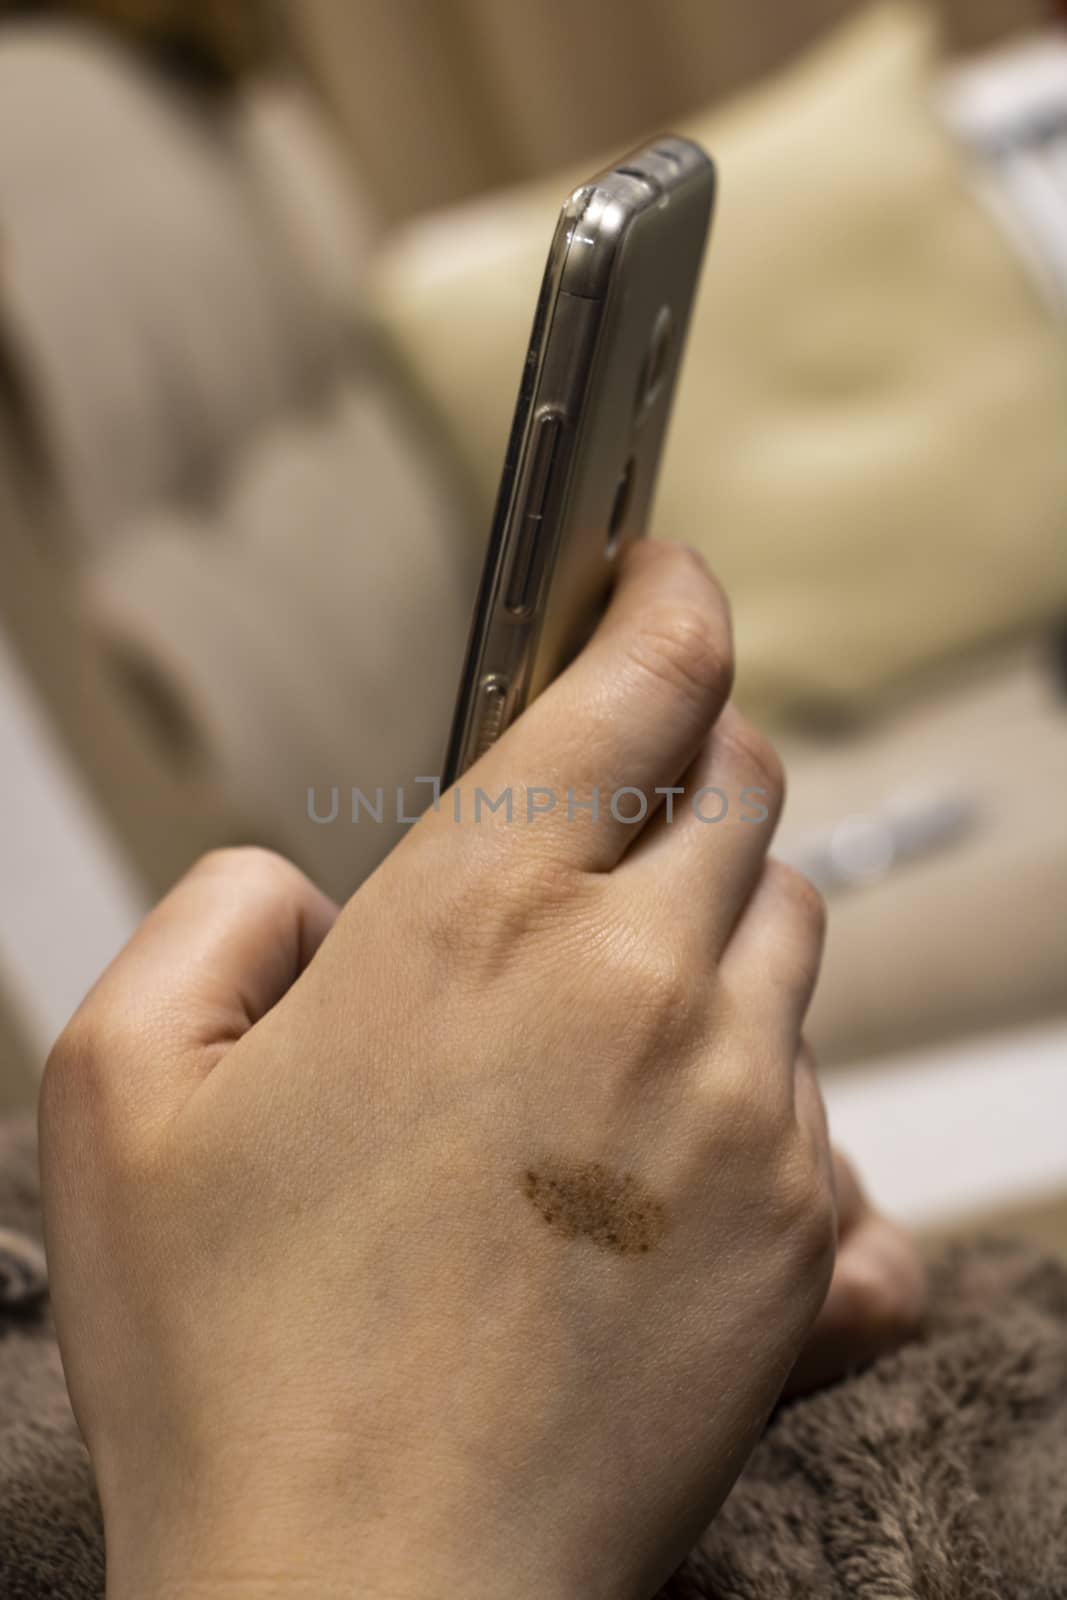 The girl, with a birthmark on her hand, using smart phone. by kip02kas